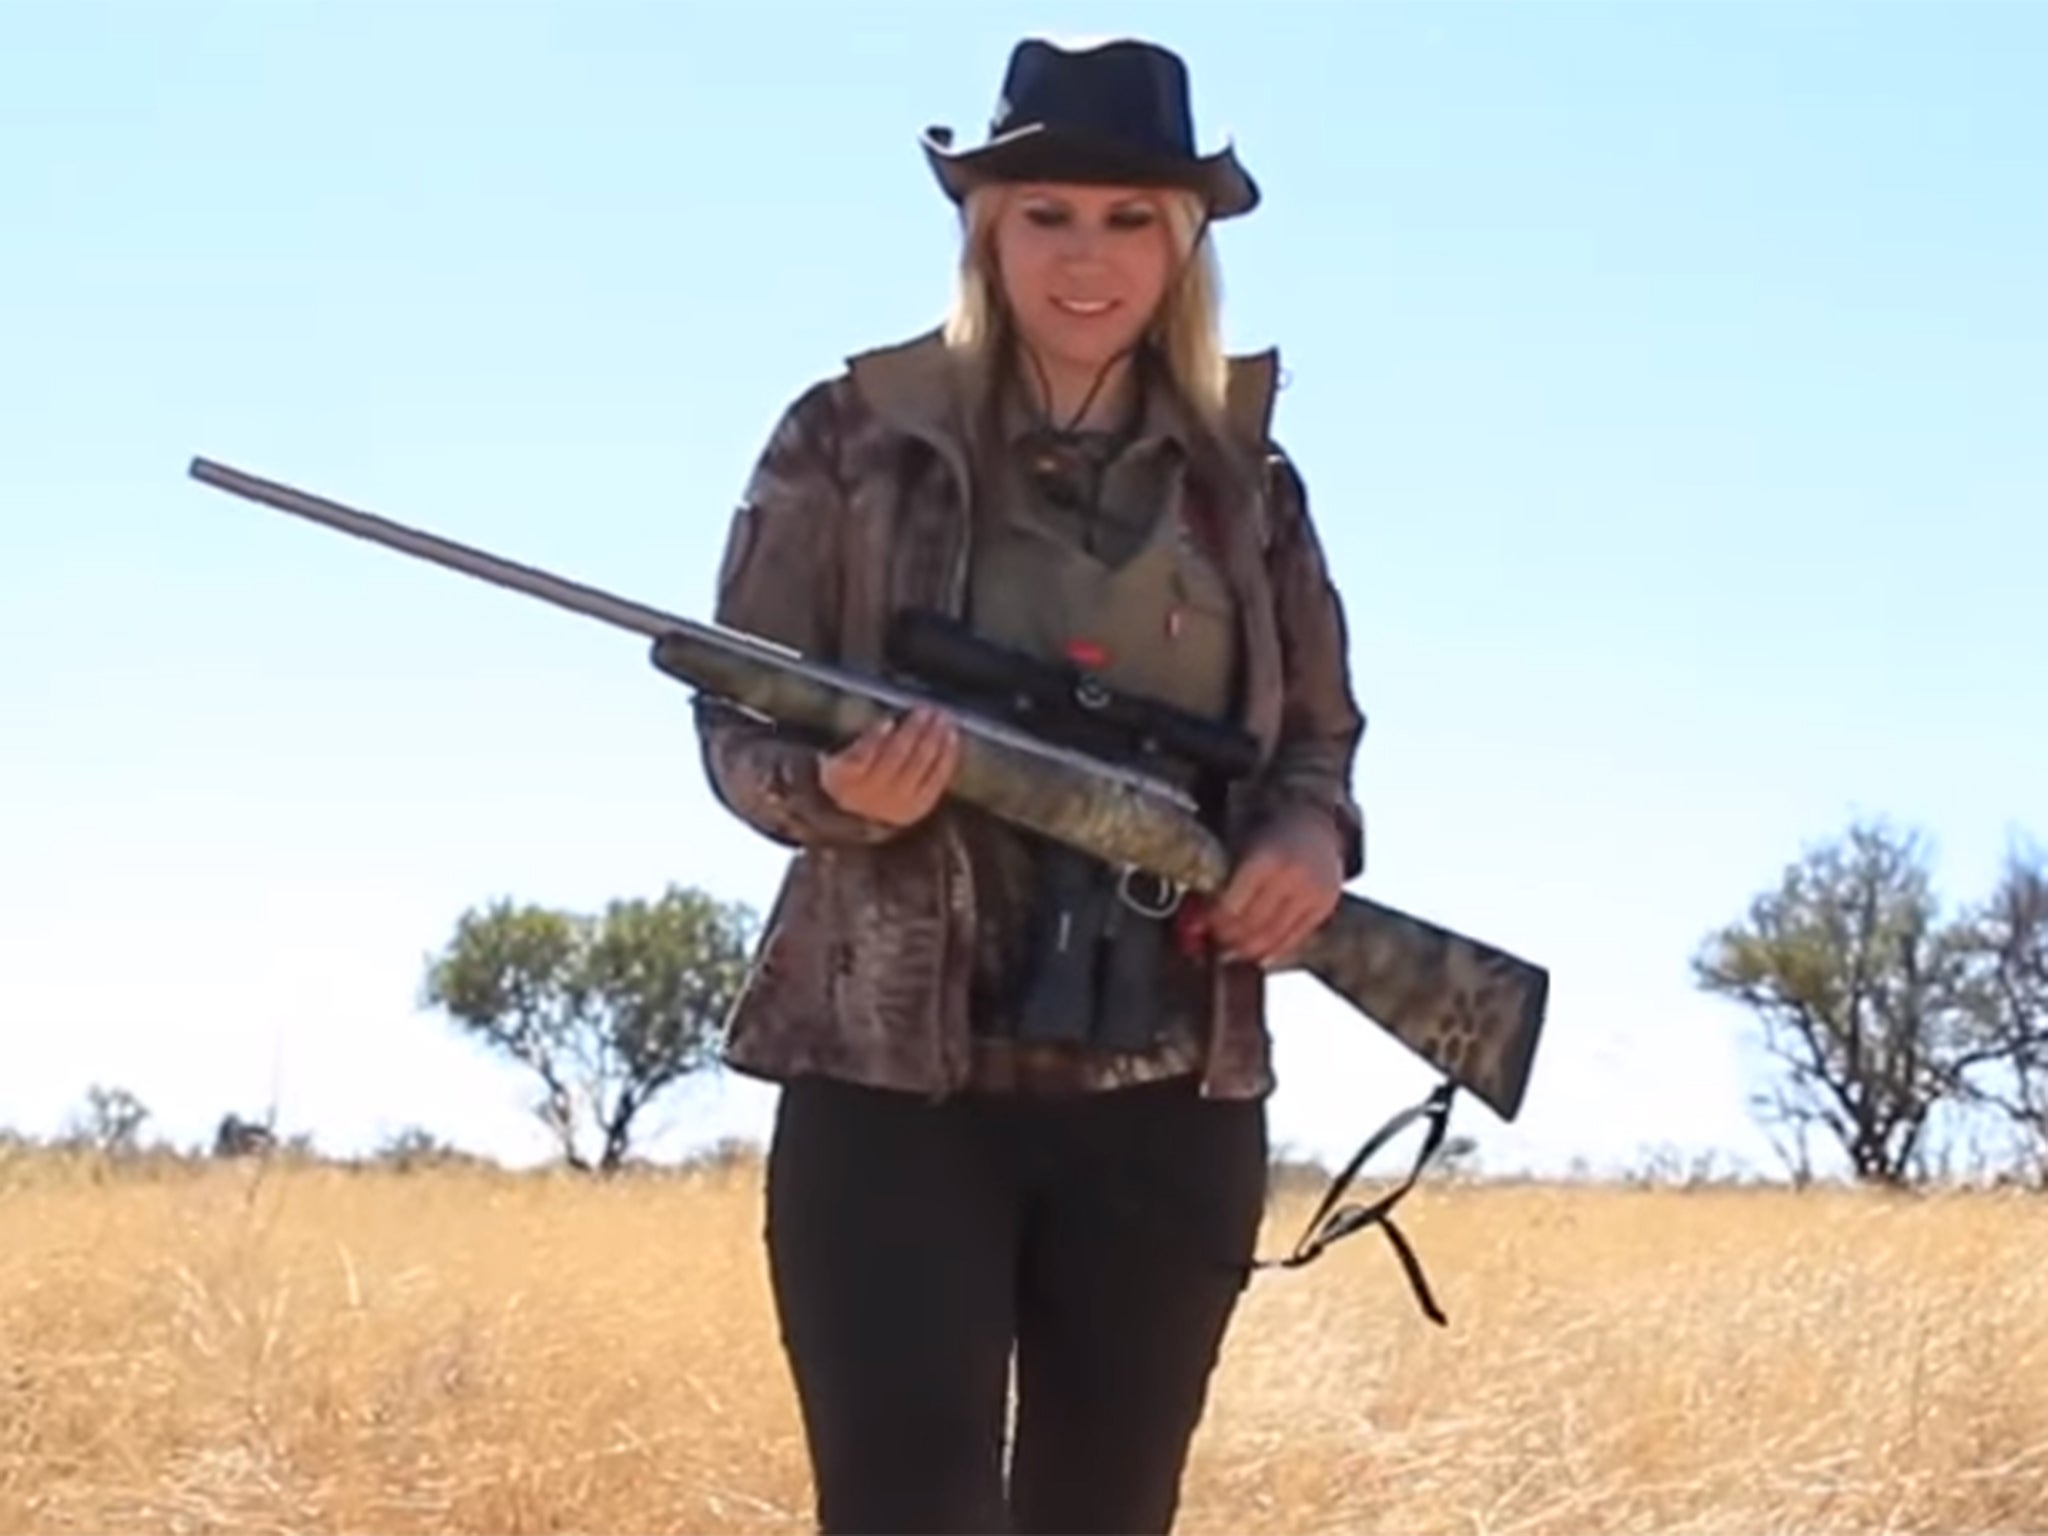 Larysa Switlyk American Tv Host May Face Criminal Charges Over Hunting